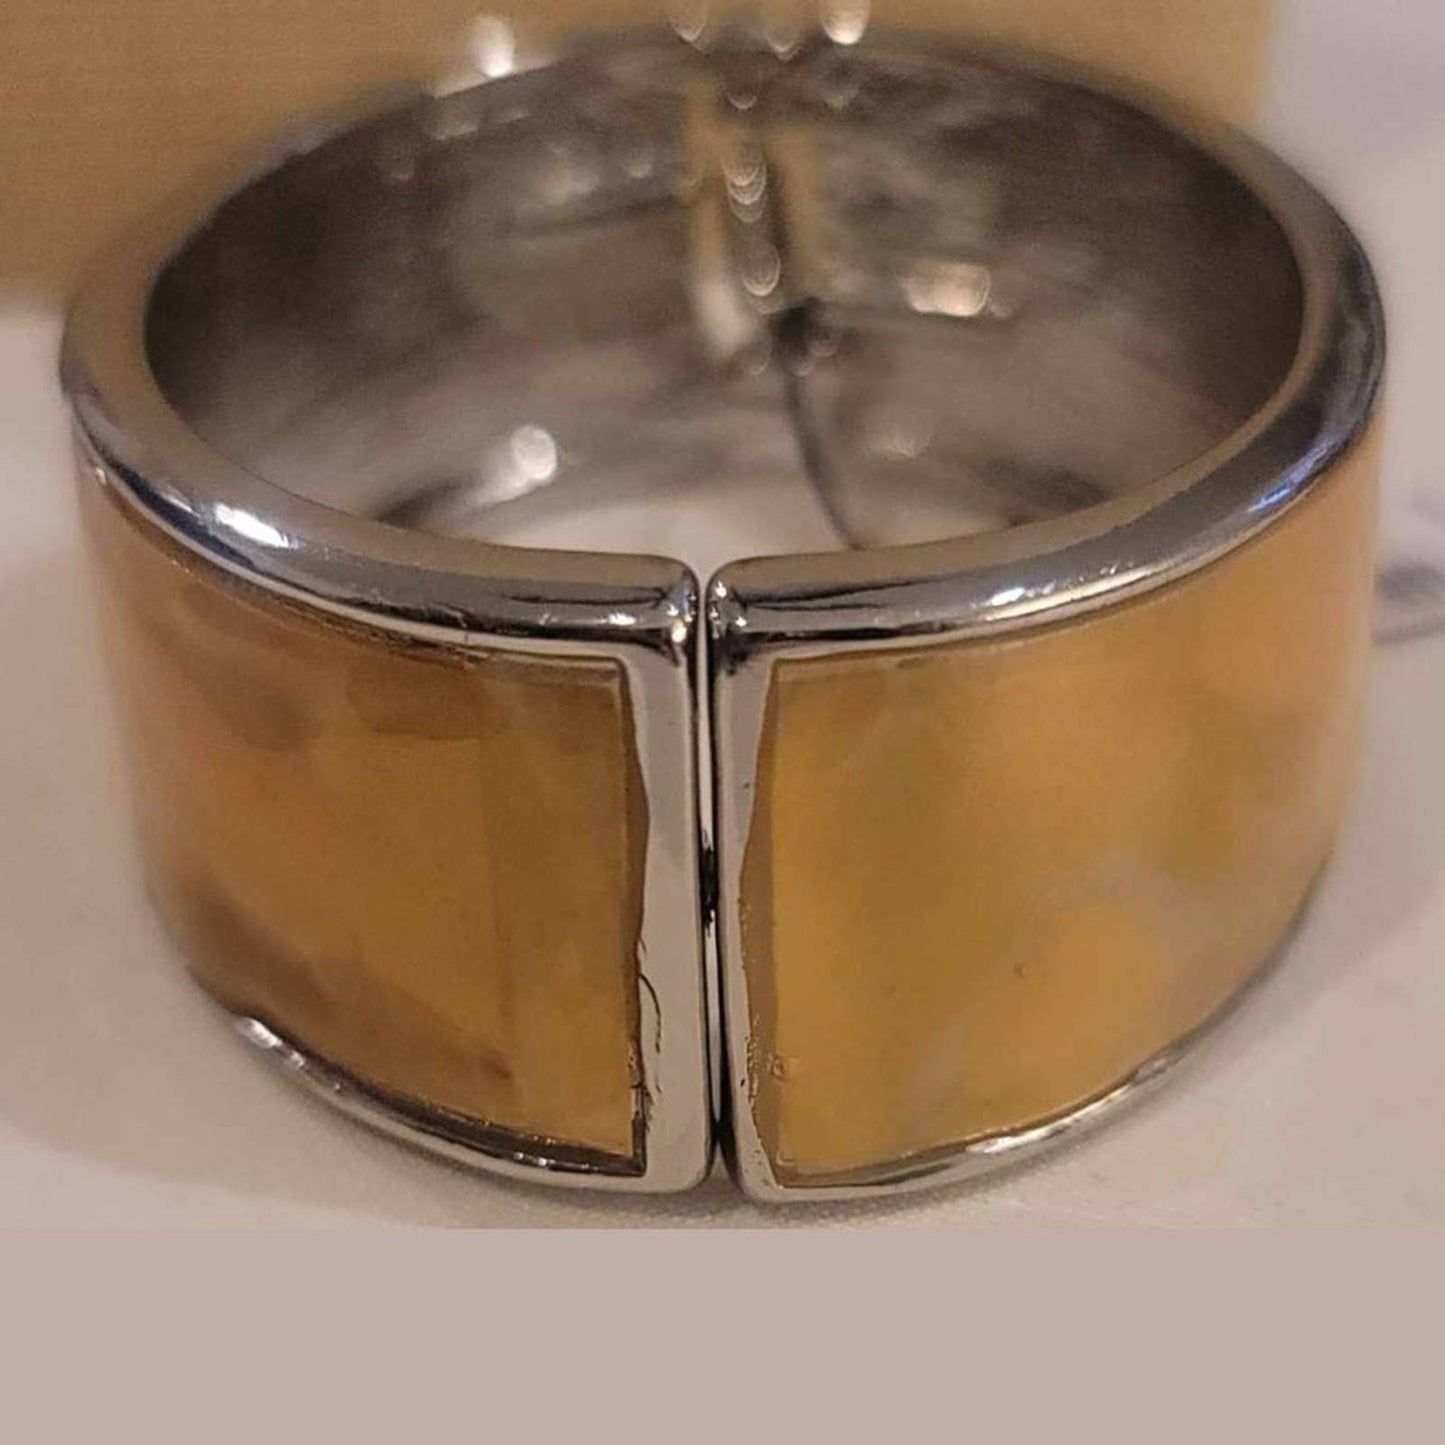 Chicos 1" Shell Shine Yellow Hinged Bangle Bracelet in Silver NWT